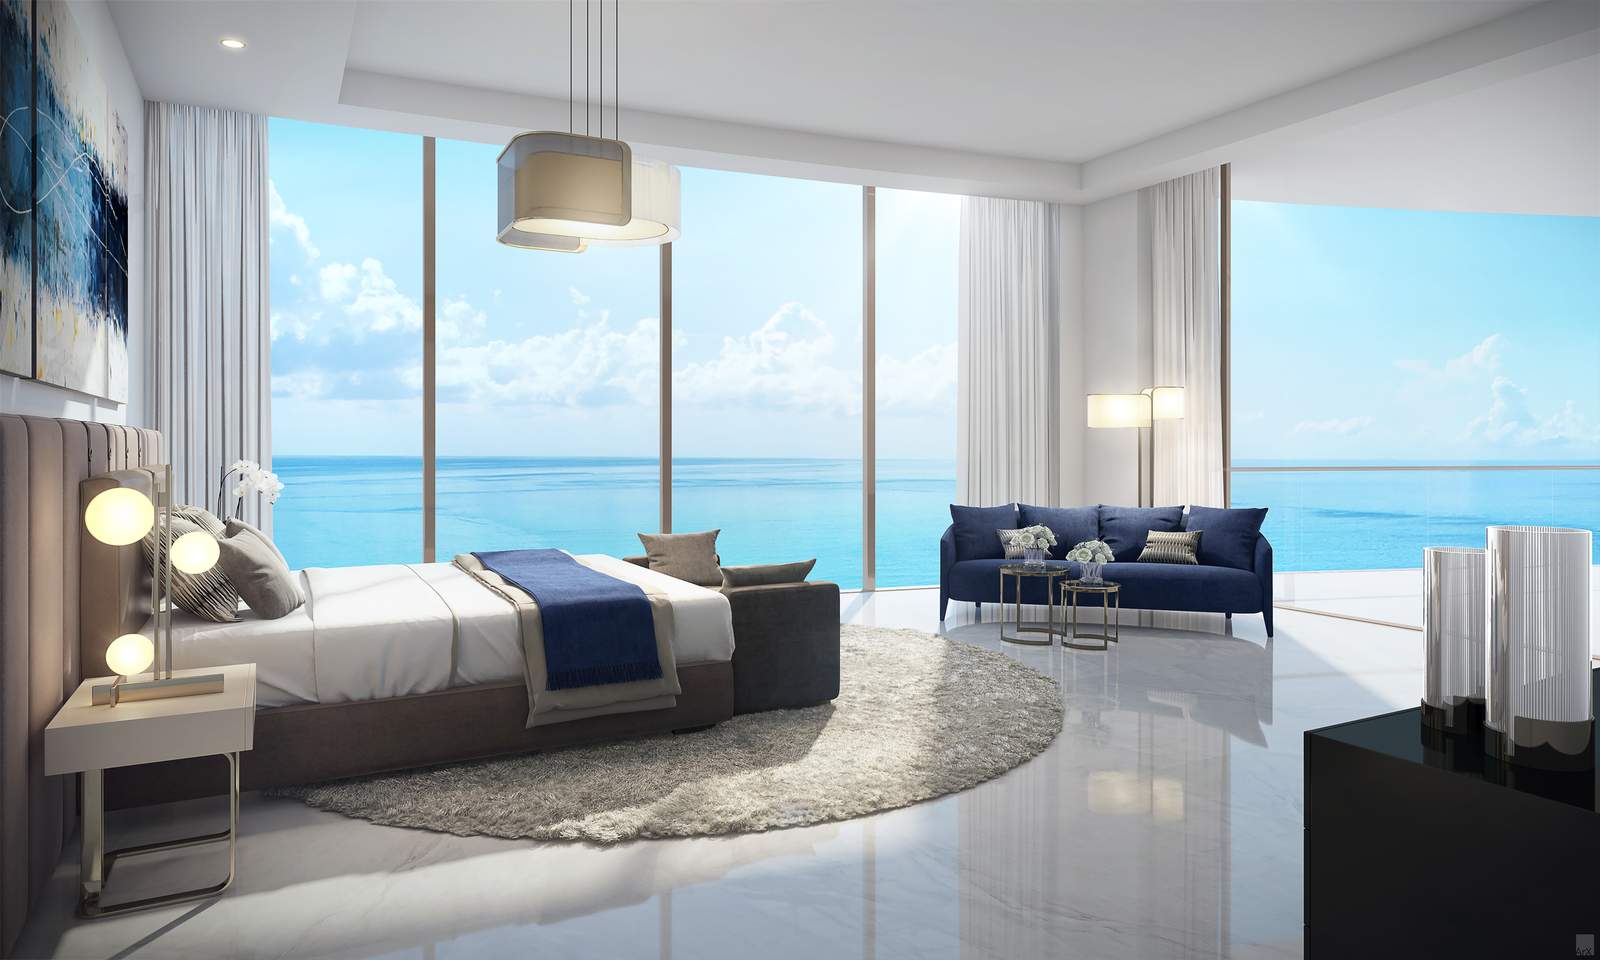 At $59 million, one of Miami’s priciest new penthouses sports Sunny Isles Beach zip code